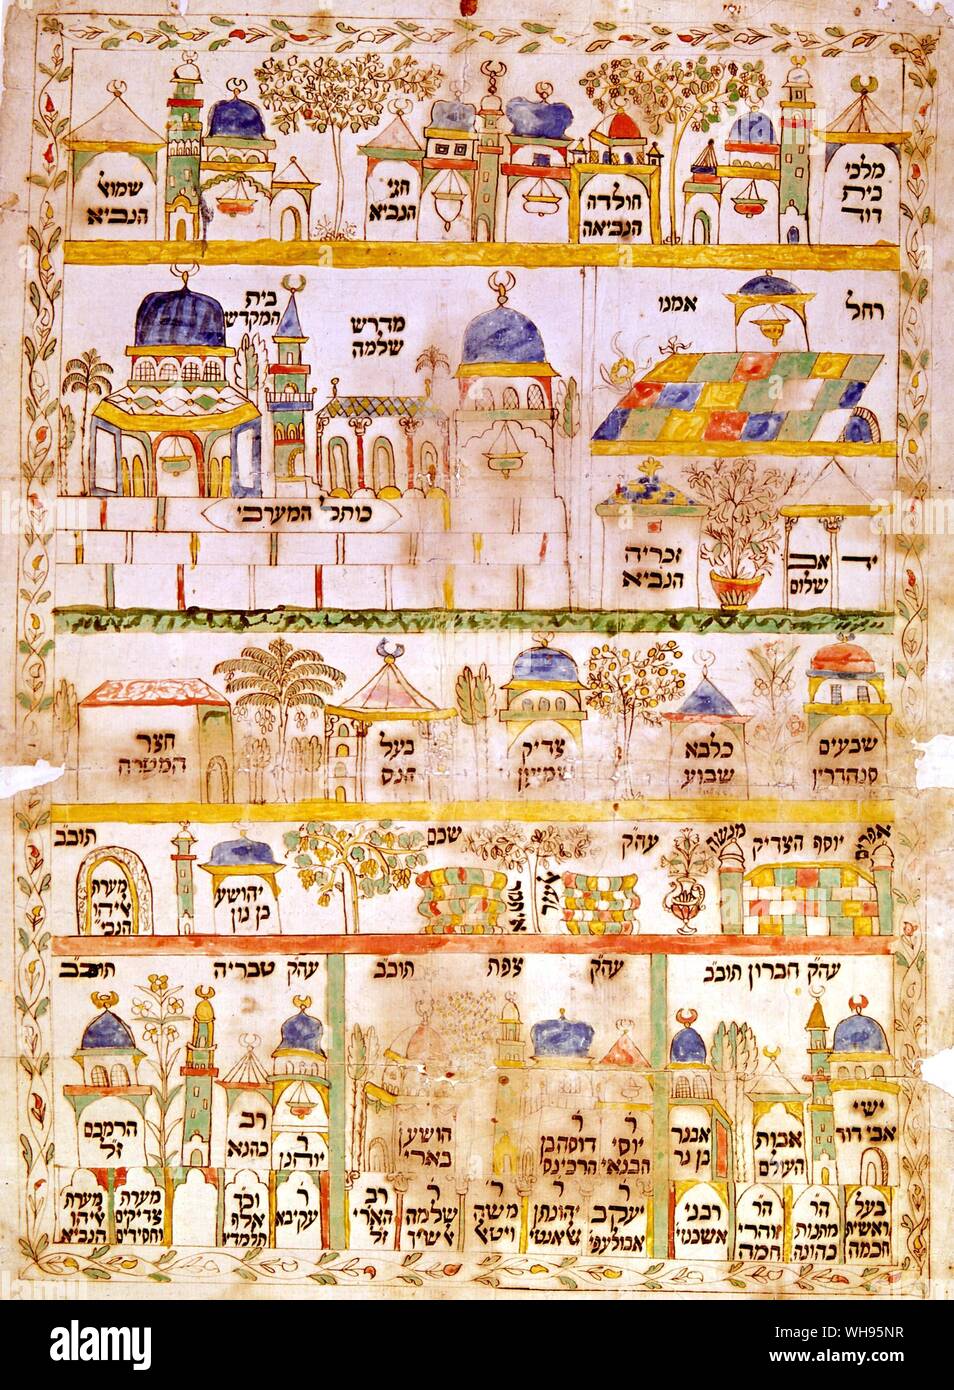 Bar Mitzvah, Jewish holy places - Itinerarium. 19th century, hand-painted/Hebrew from the Israel museum, Jerusalem. Stock Photo